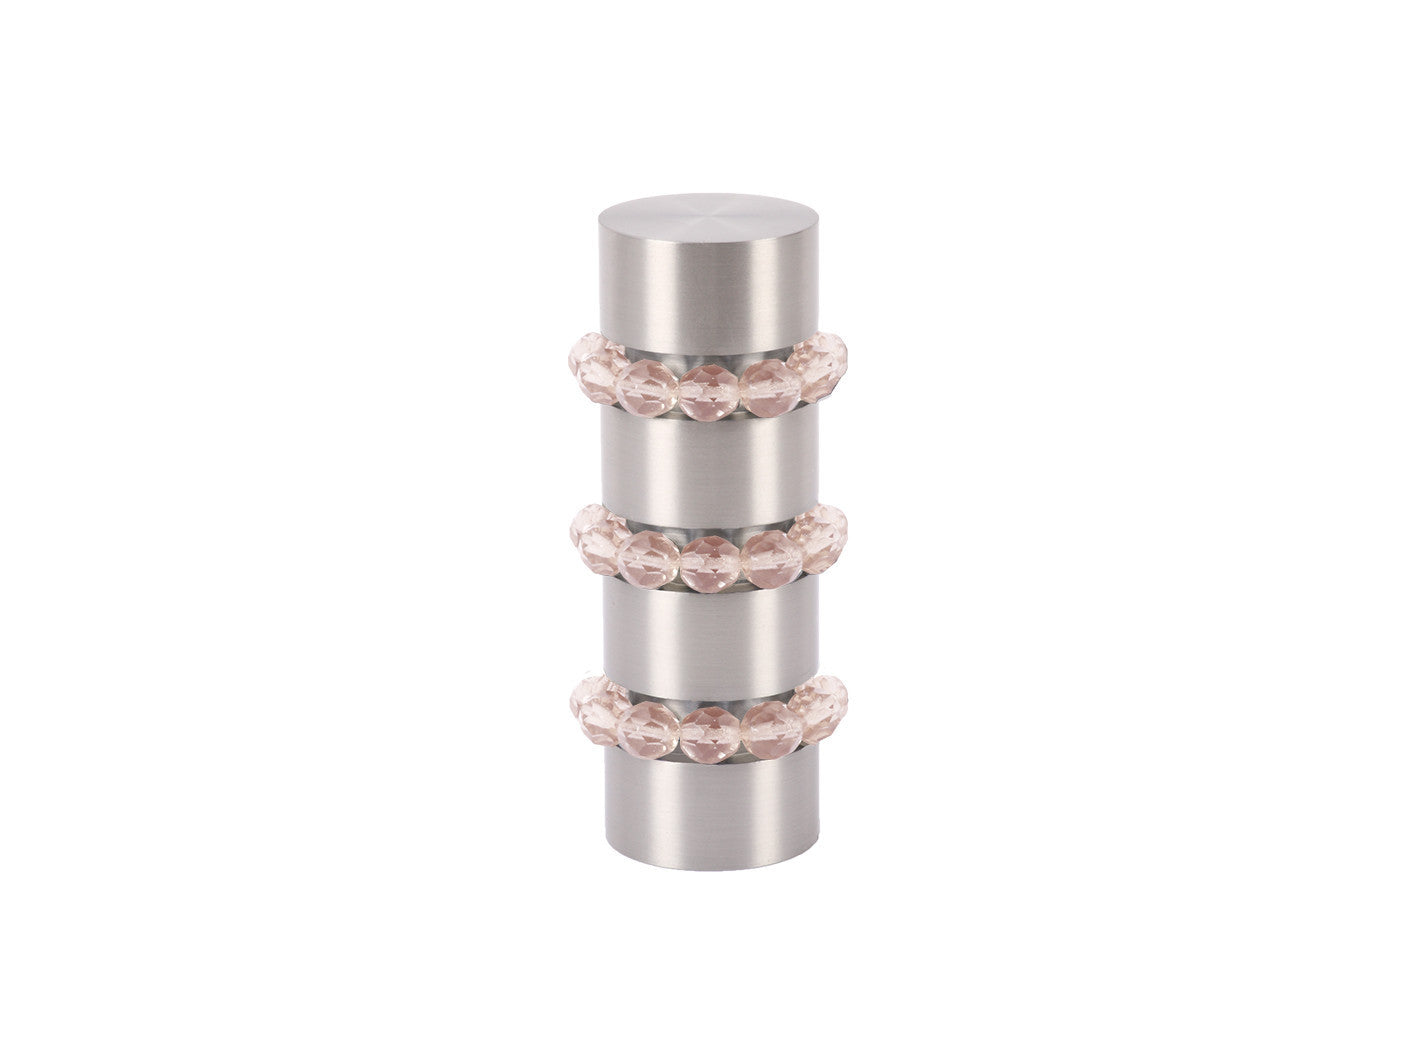 Beaded stainless steel curtain pole finial in soft pink glass | Walcot House 19mm collection